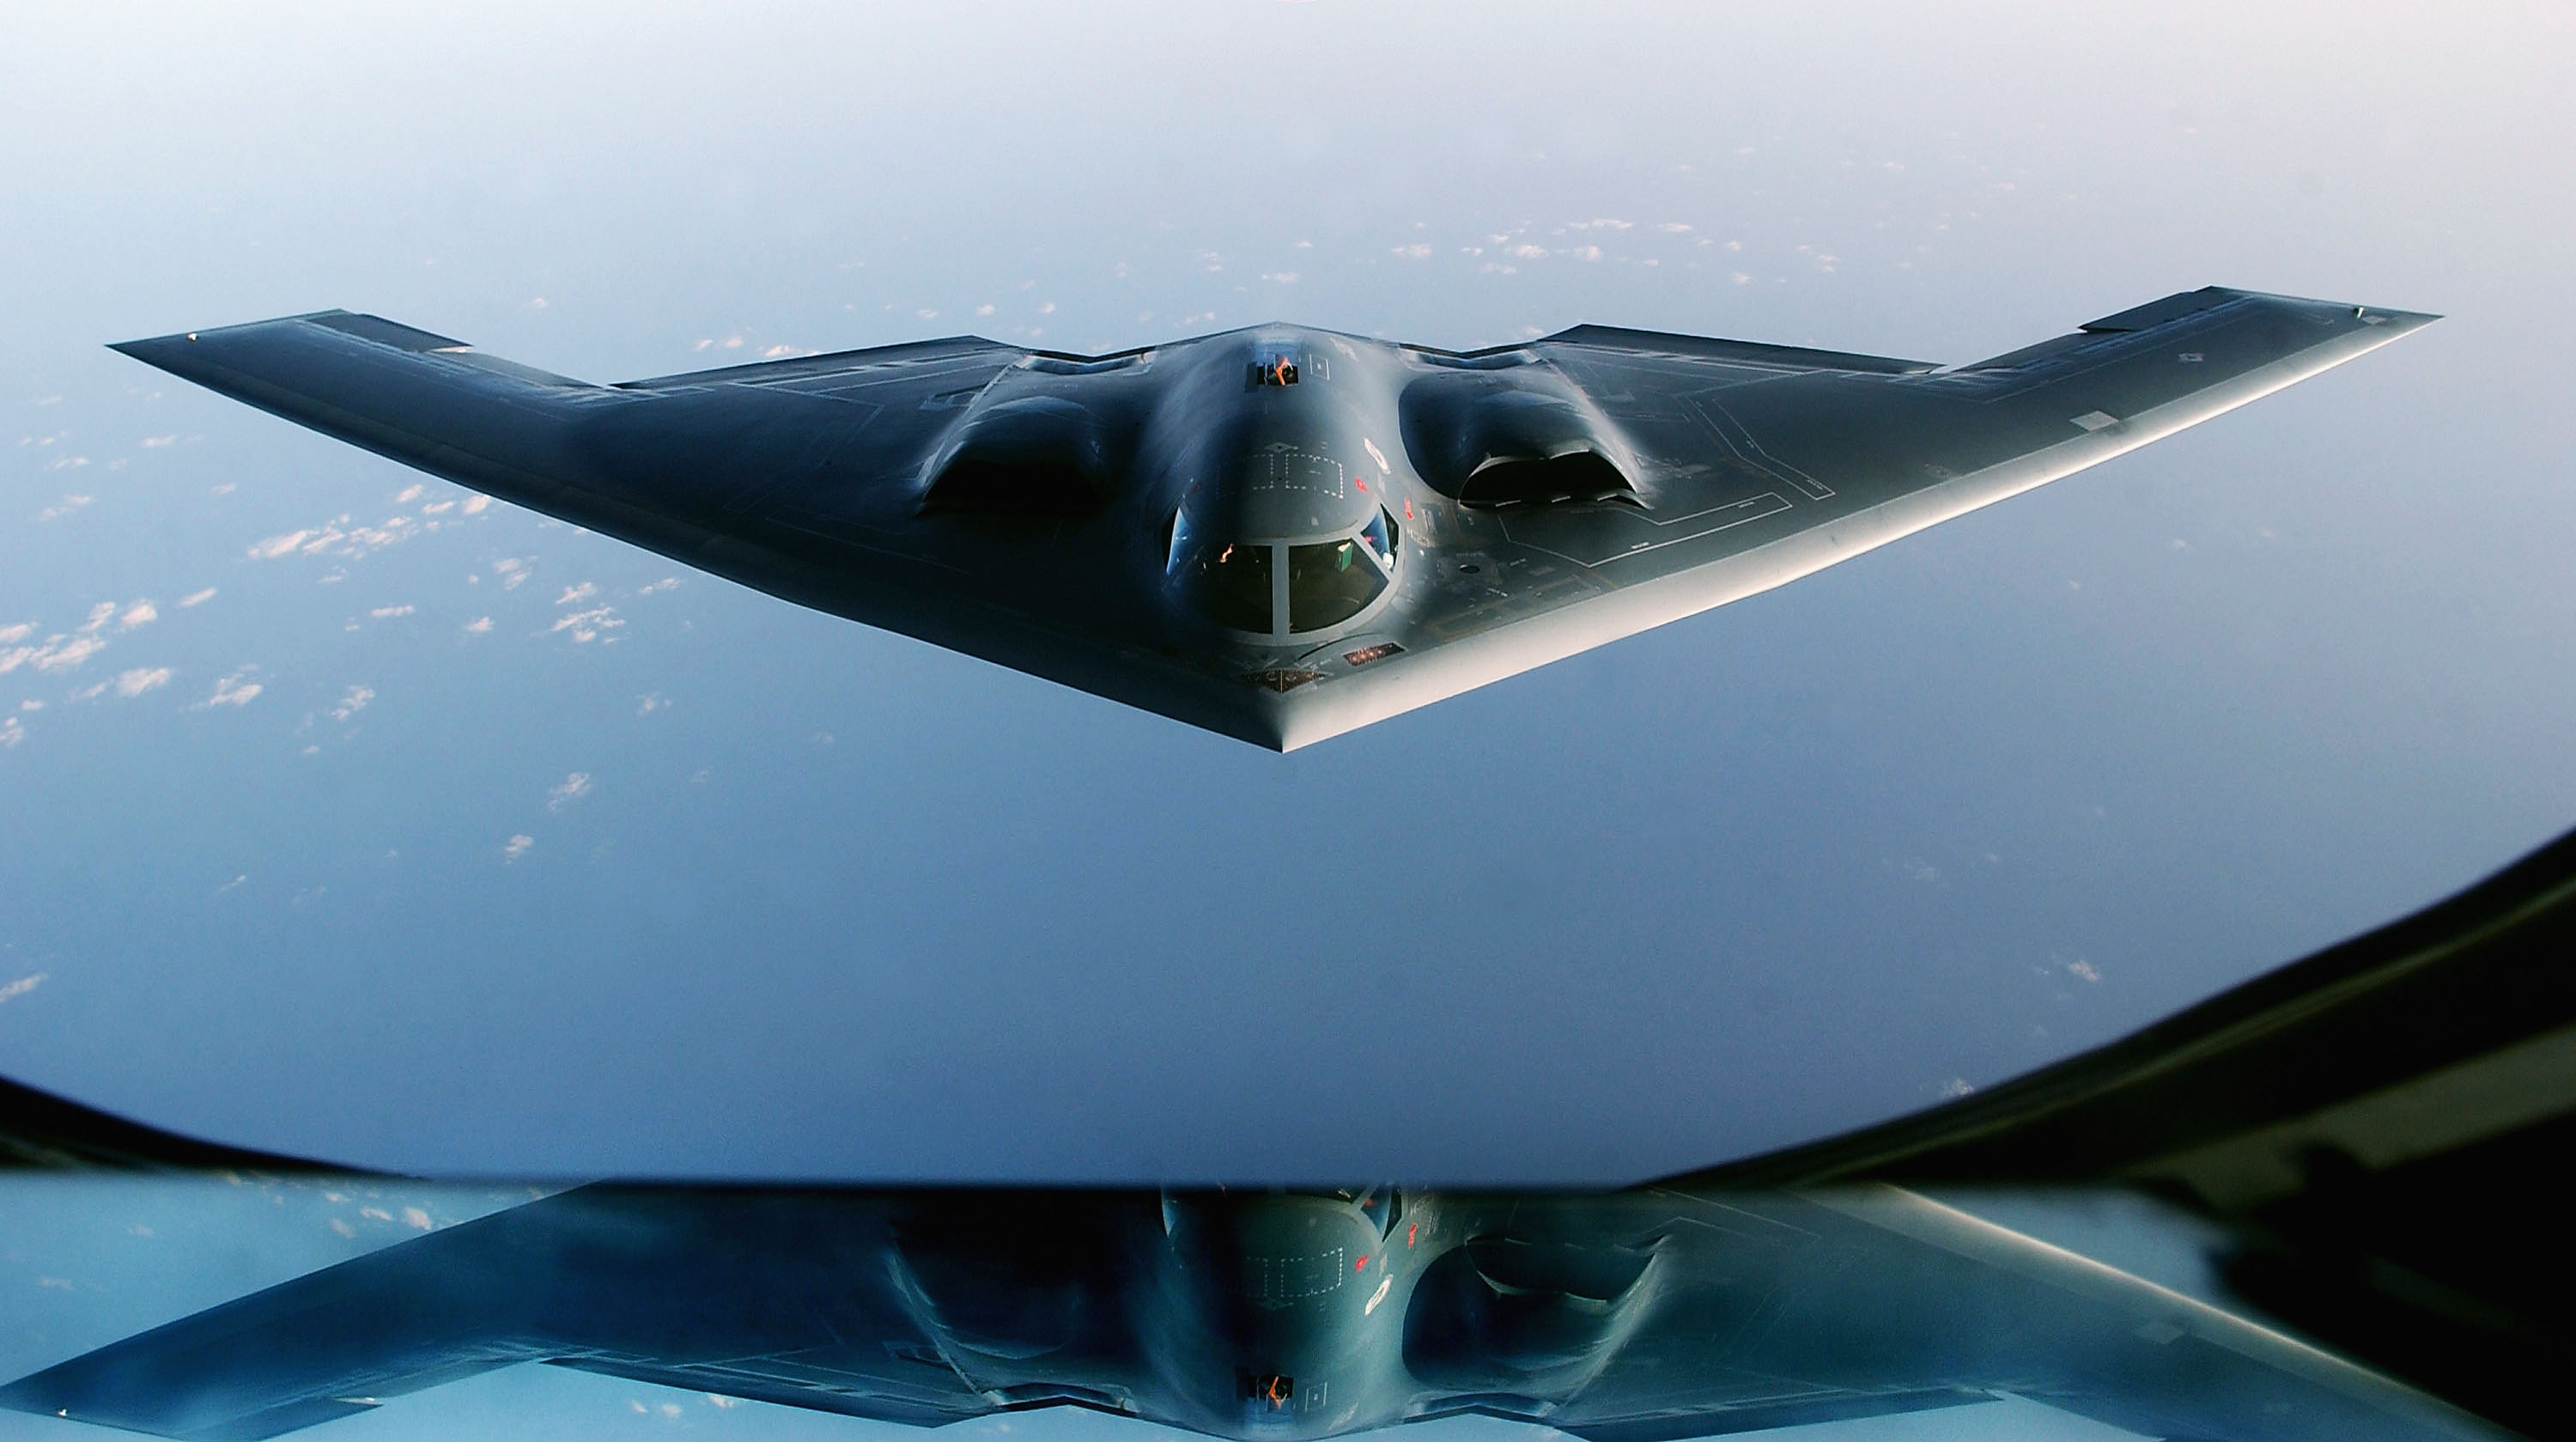 Leasing a B-2 would send a clear message.&nbsp;